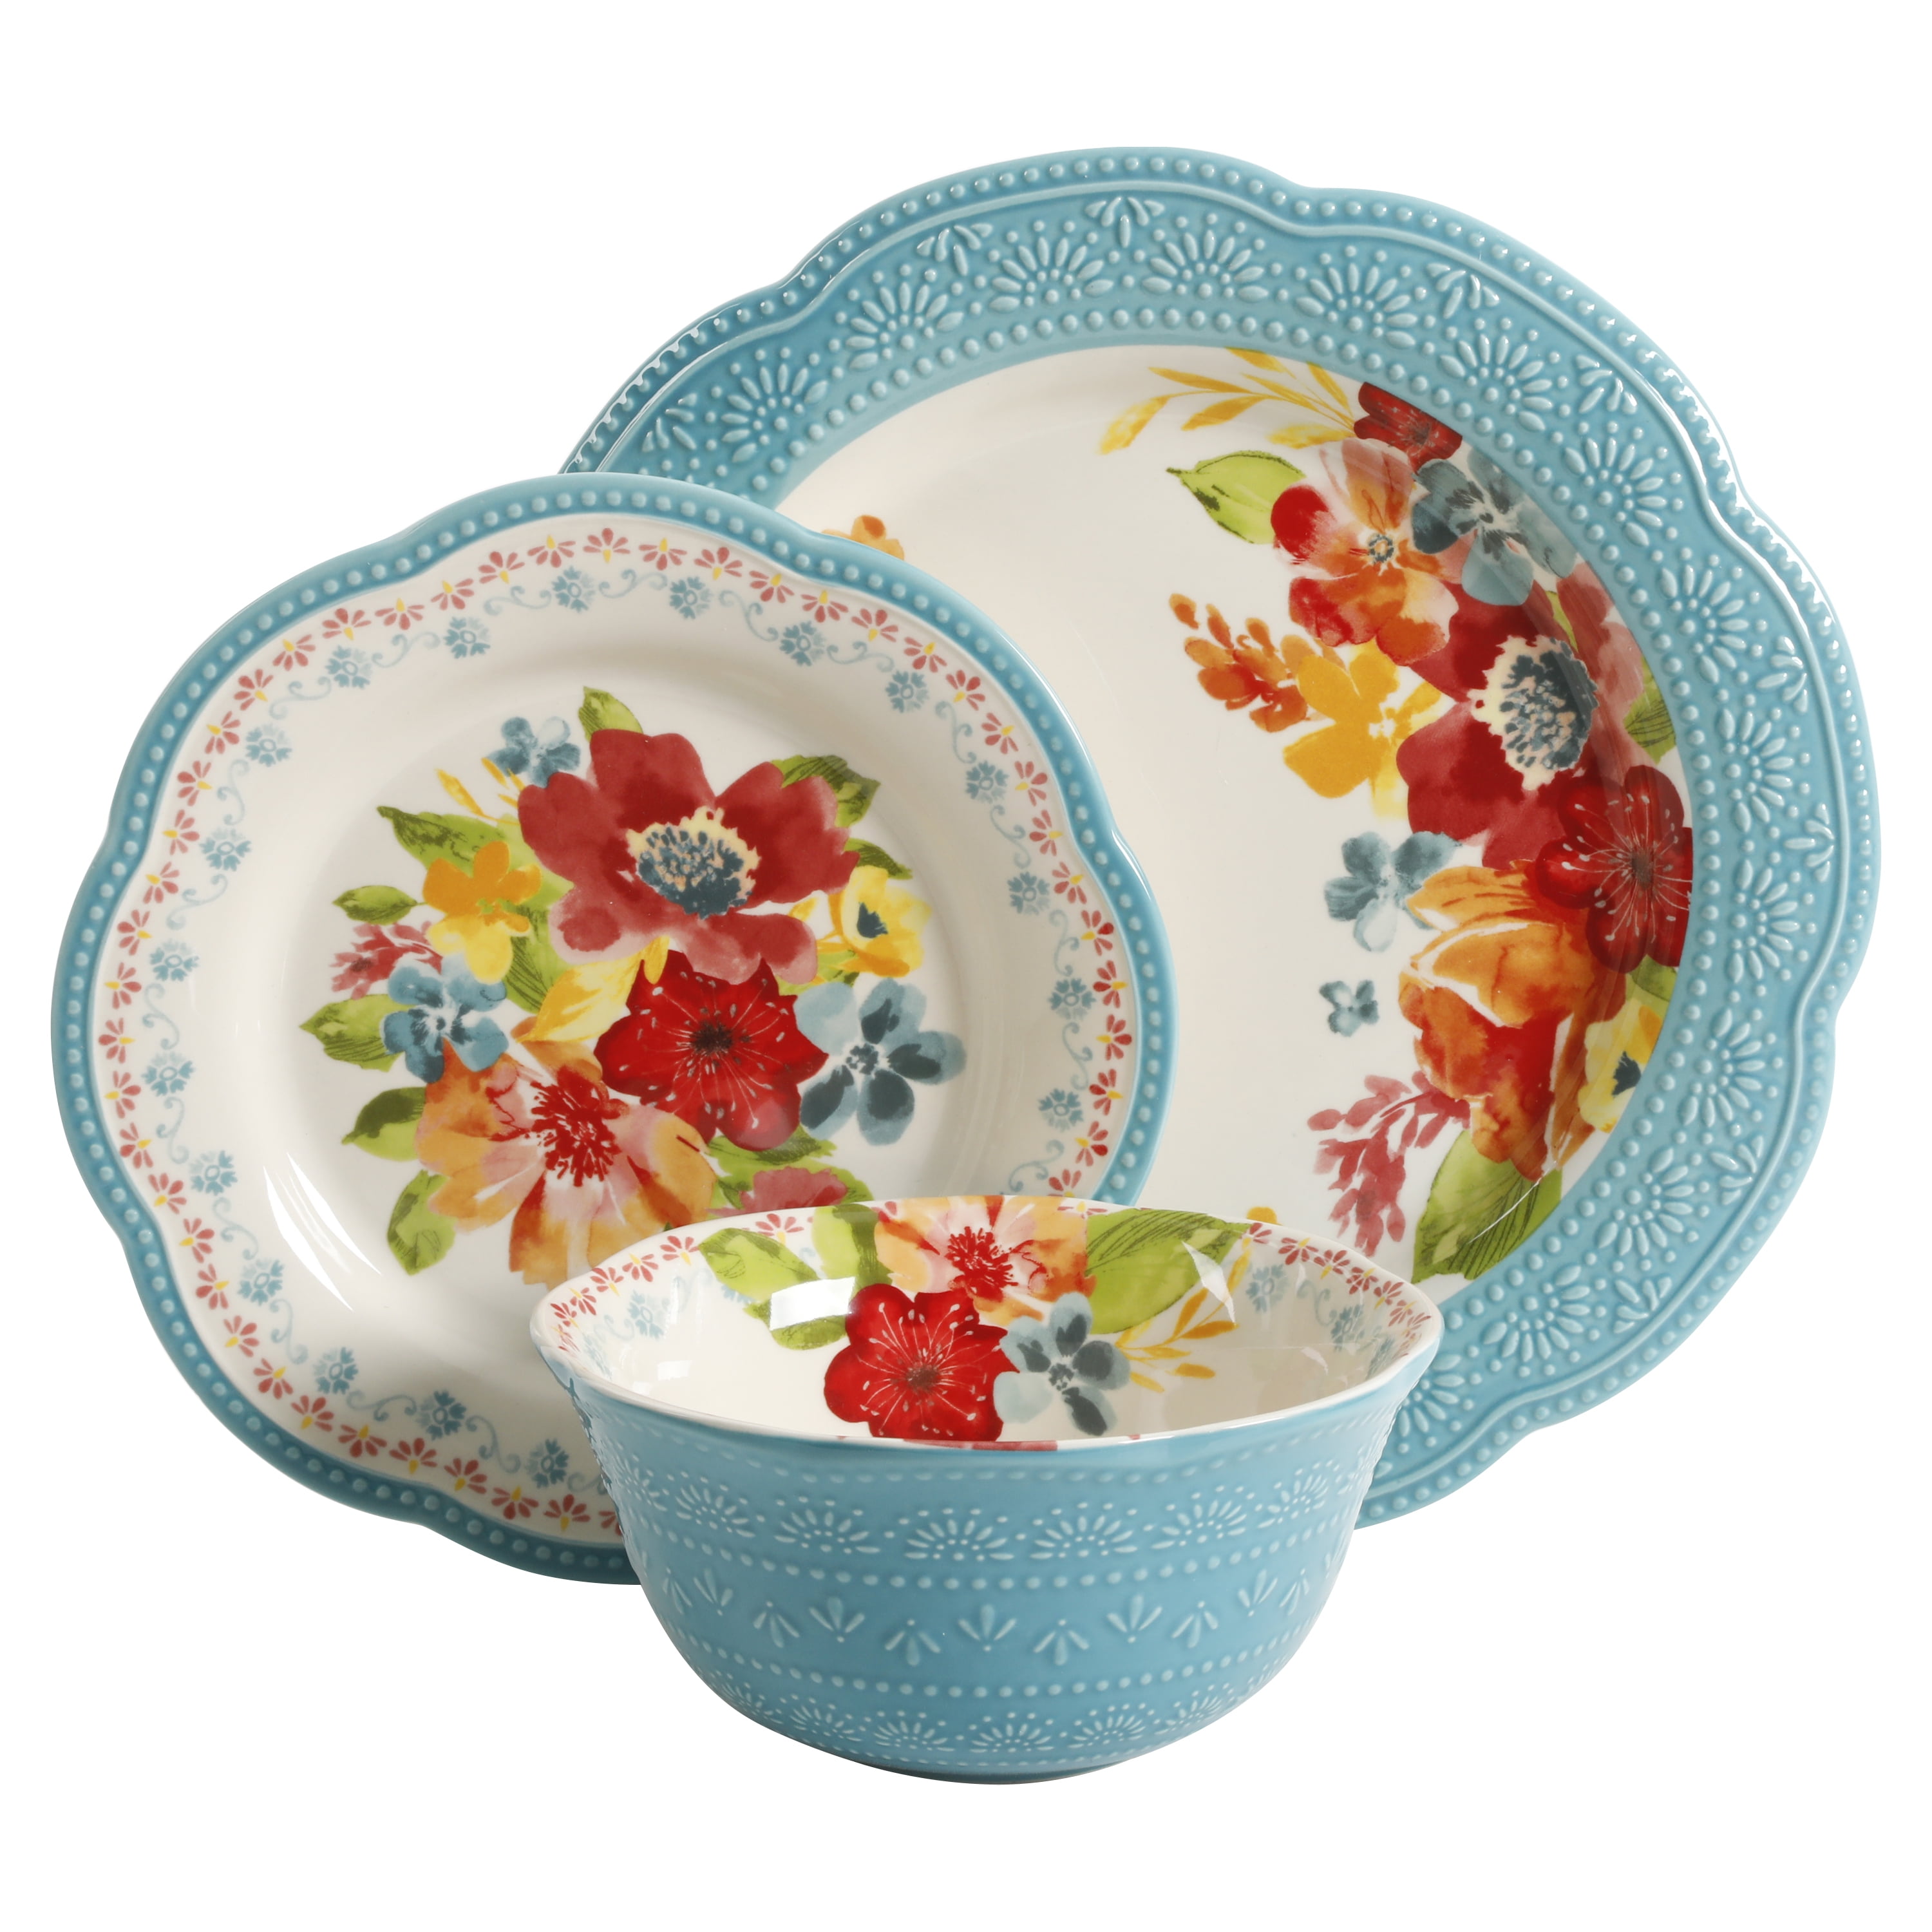 Details about   The Pioneer Woman Blooming Bouquet 12-Piece Dinnerware Set 